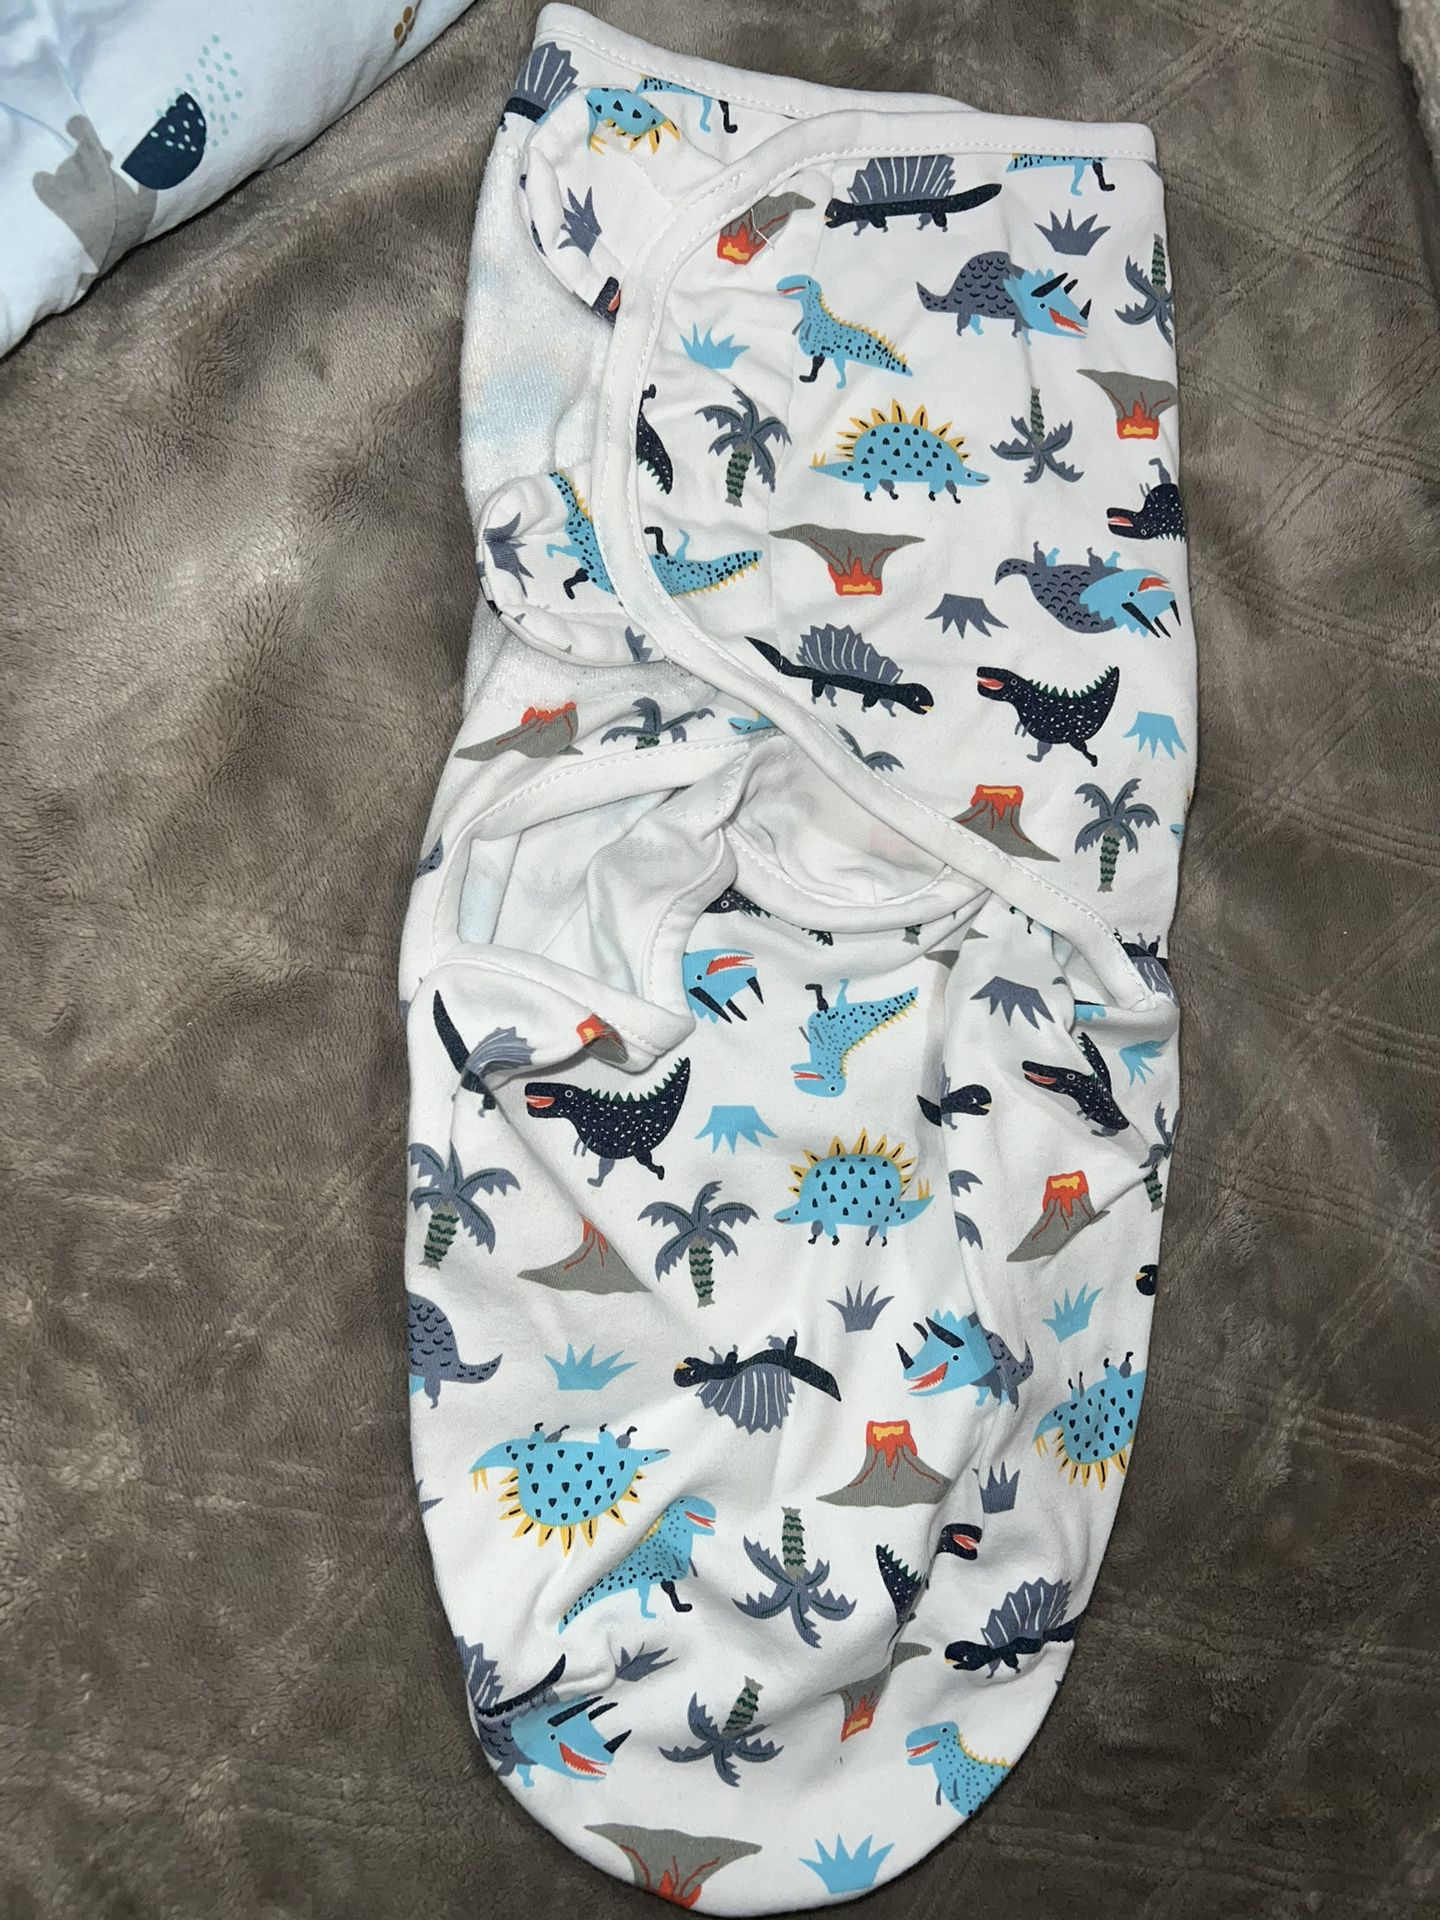 Adjustable Baby Swaddles